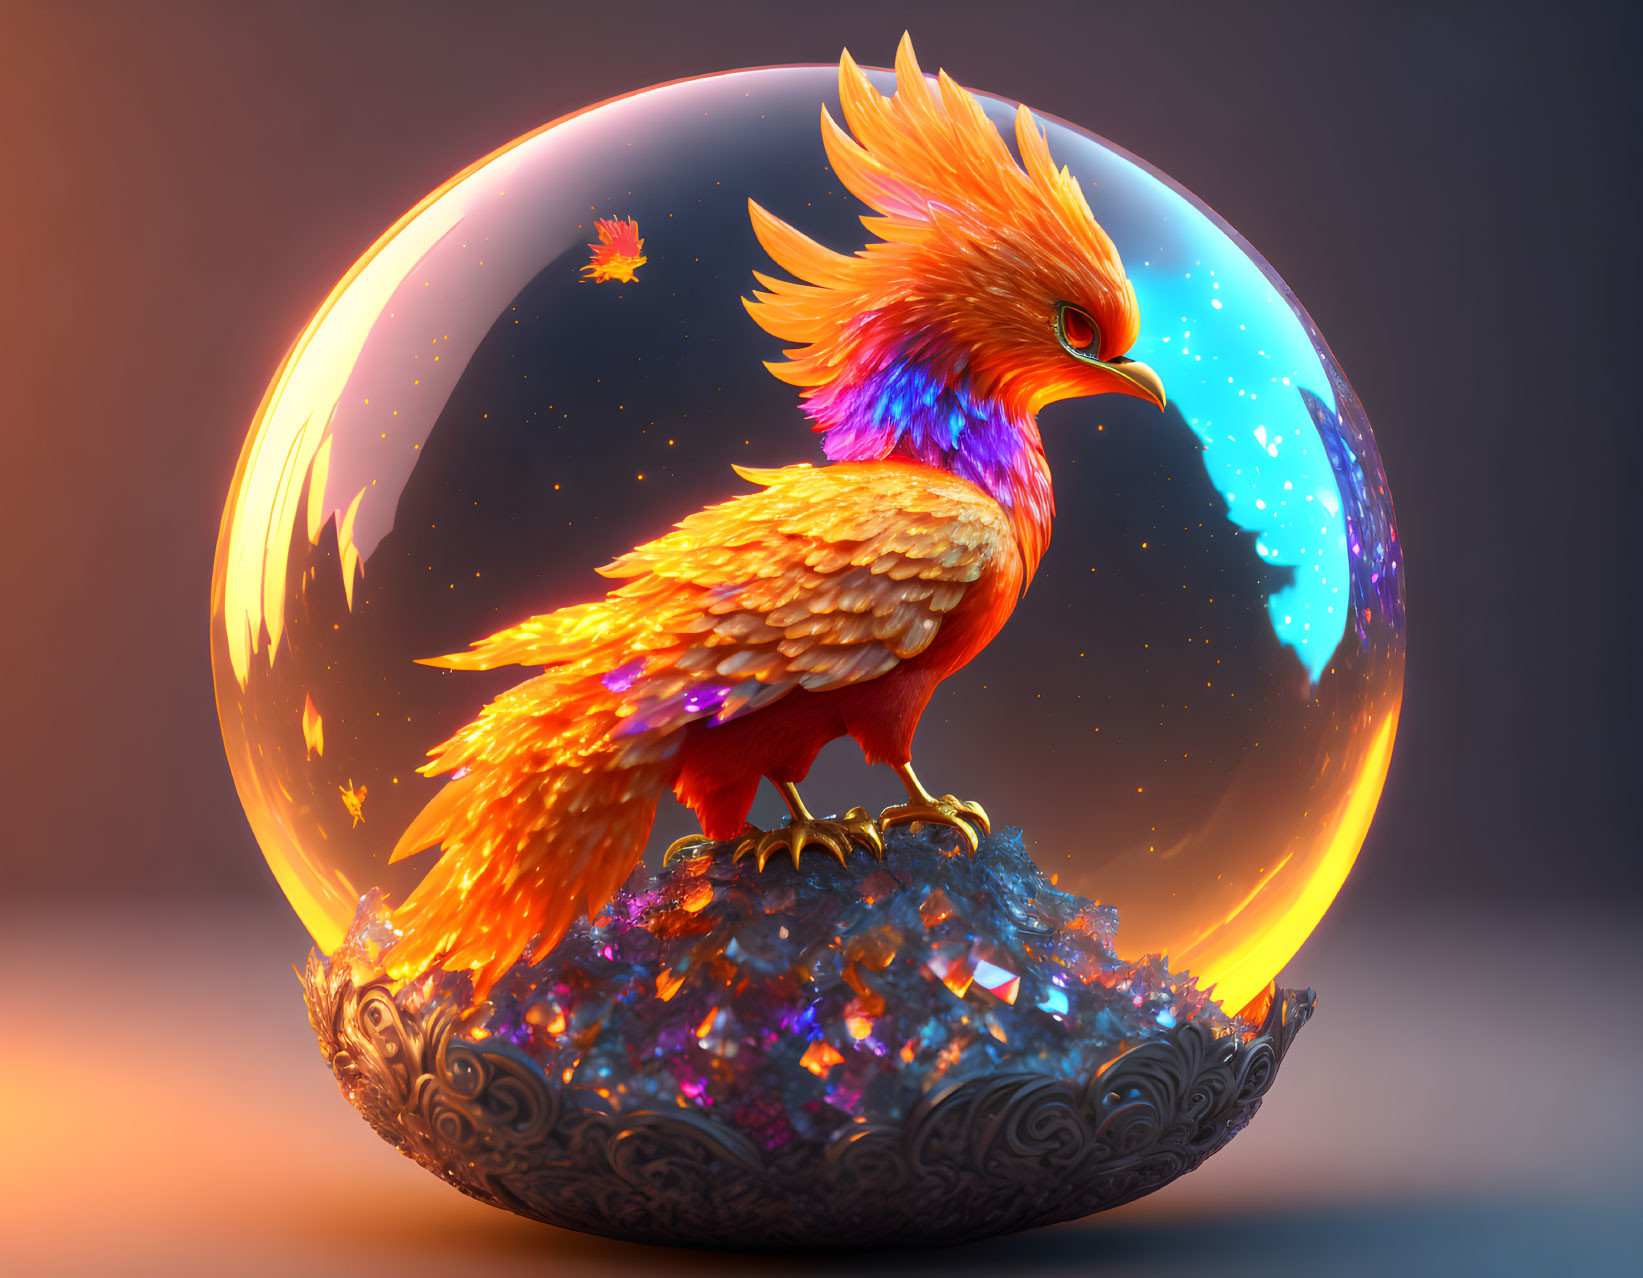 Fiery phoenix in transparent orb surrounded by celestial bodies